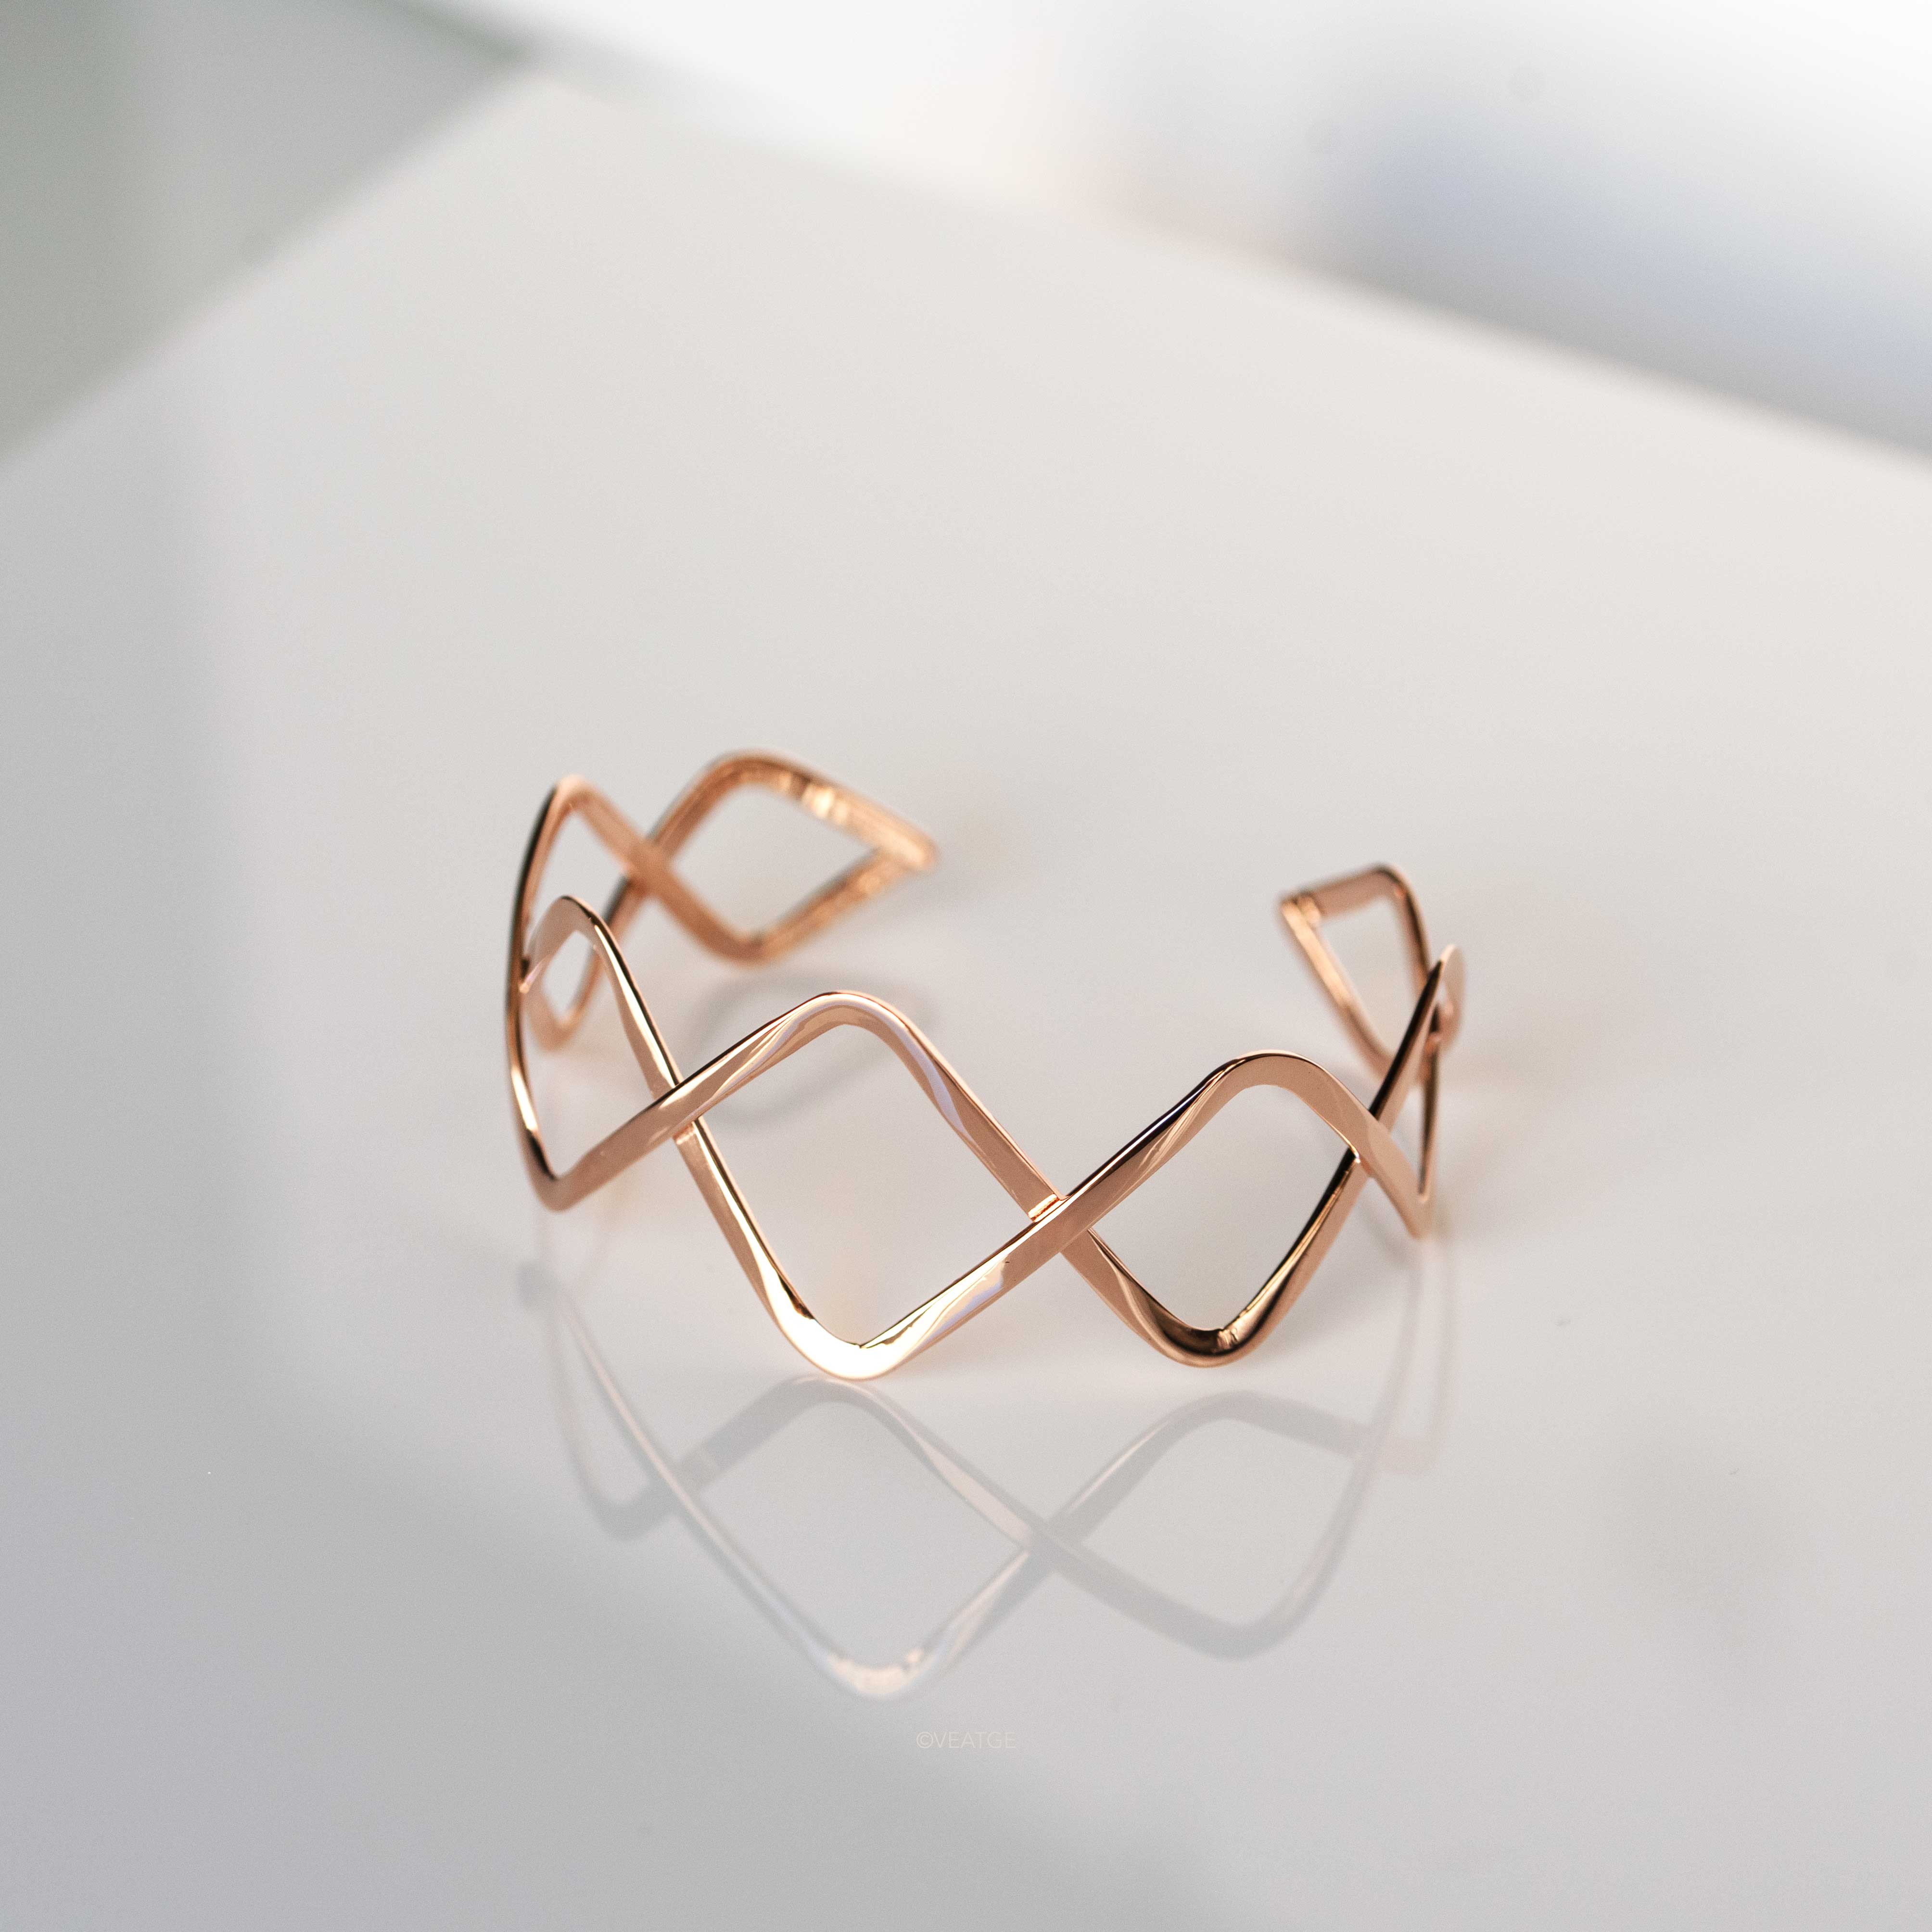 Infinity Cuff Bracelet for Women, best Rose gold gifts for her, Statement Jewelry